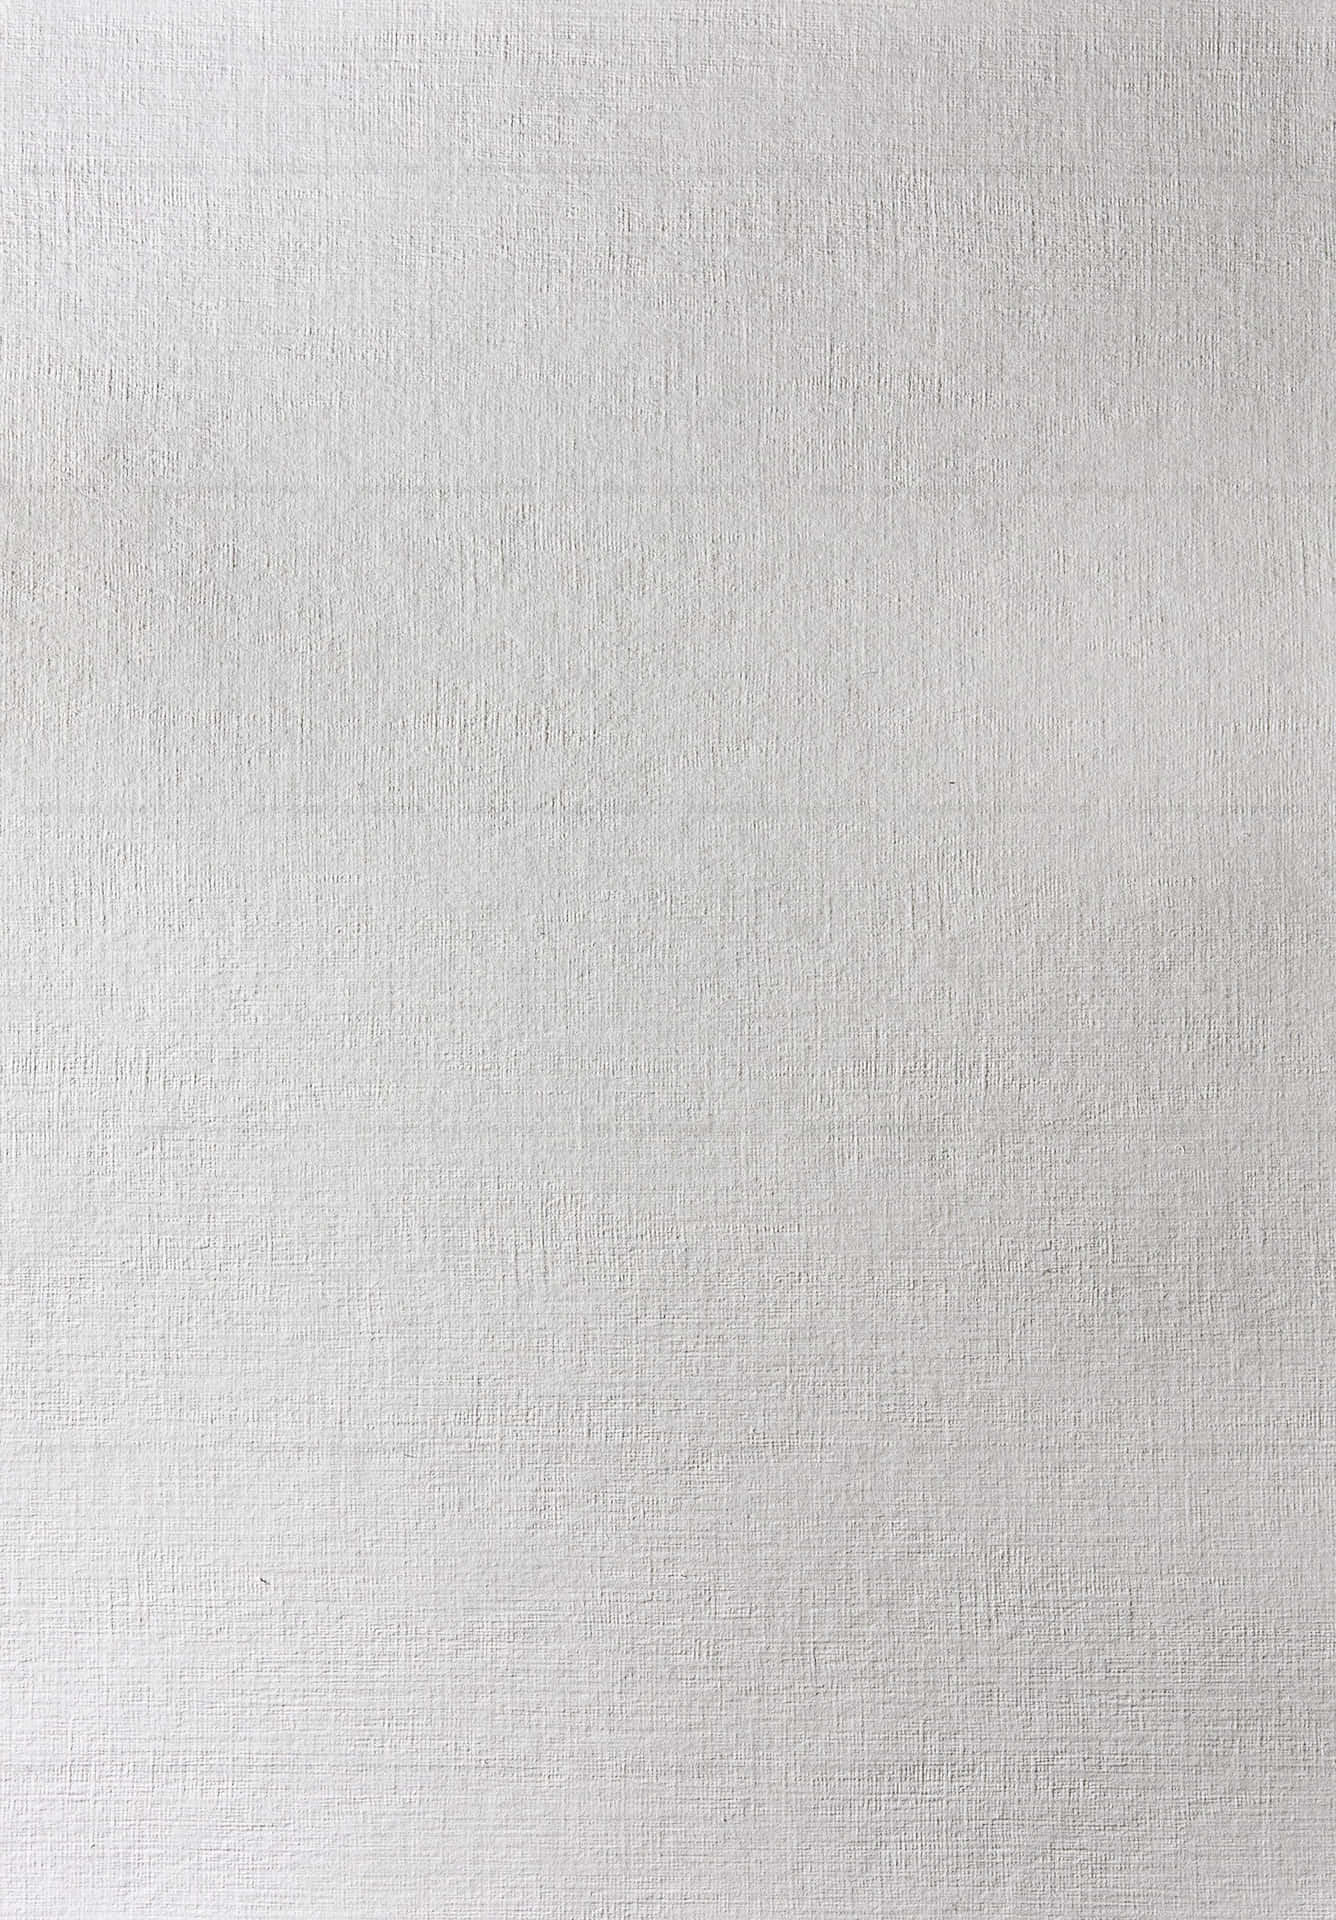 A White Piece Of Paper With A White Background